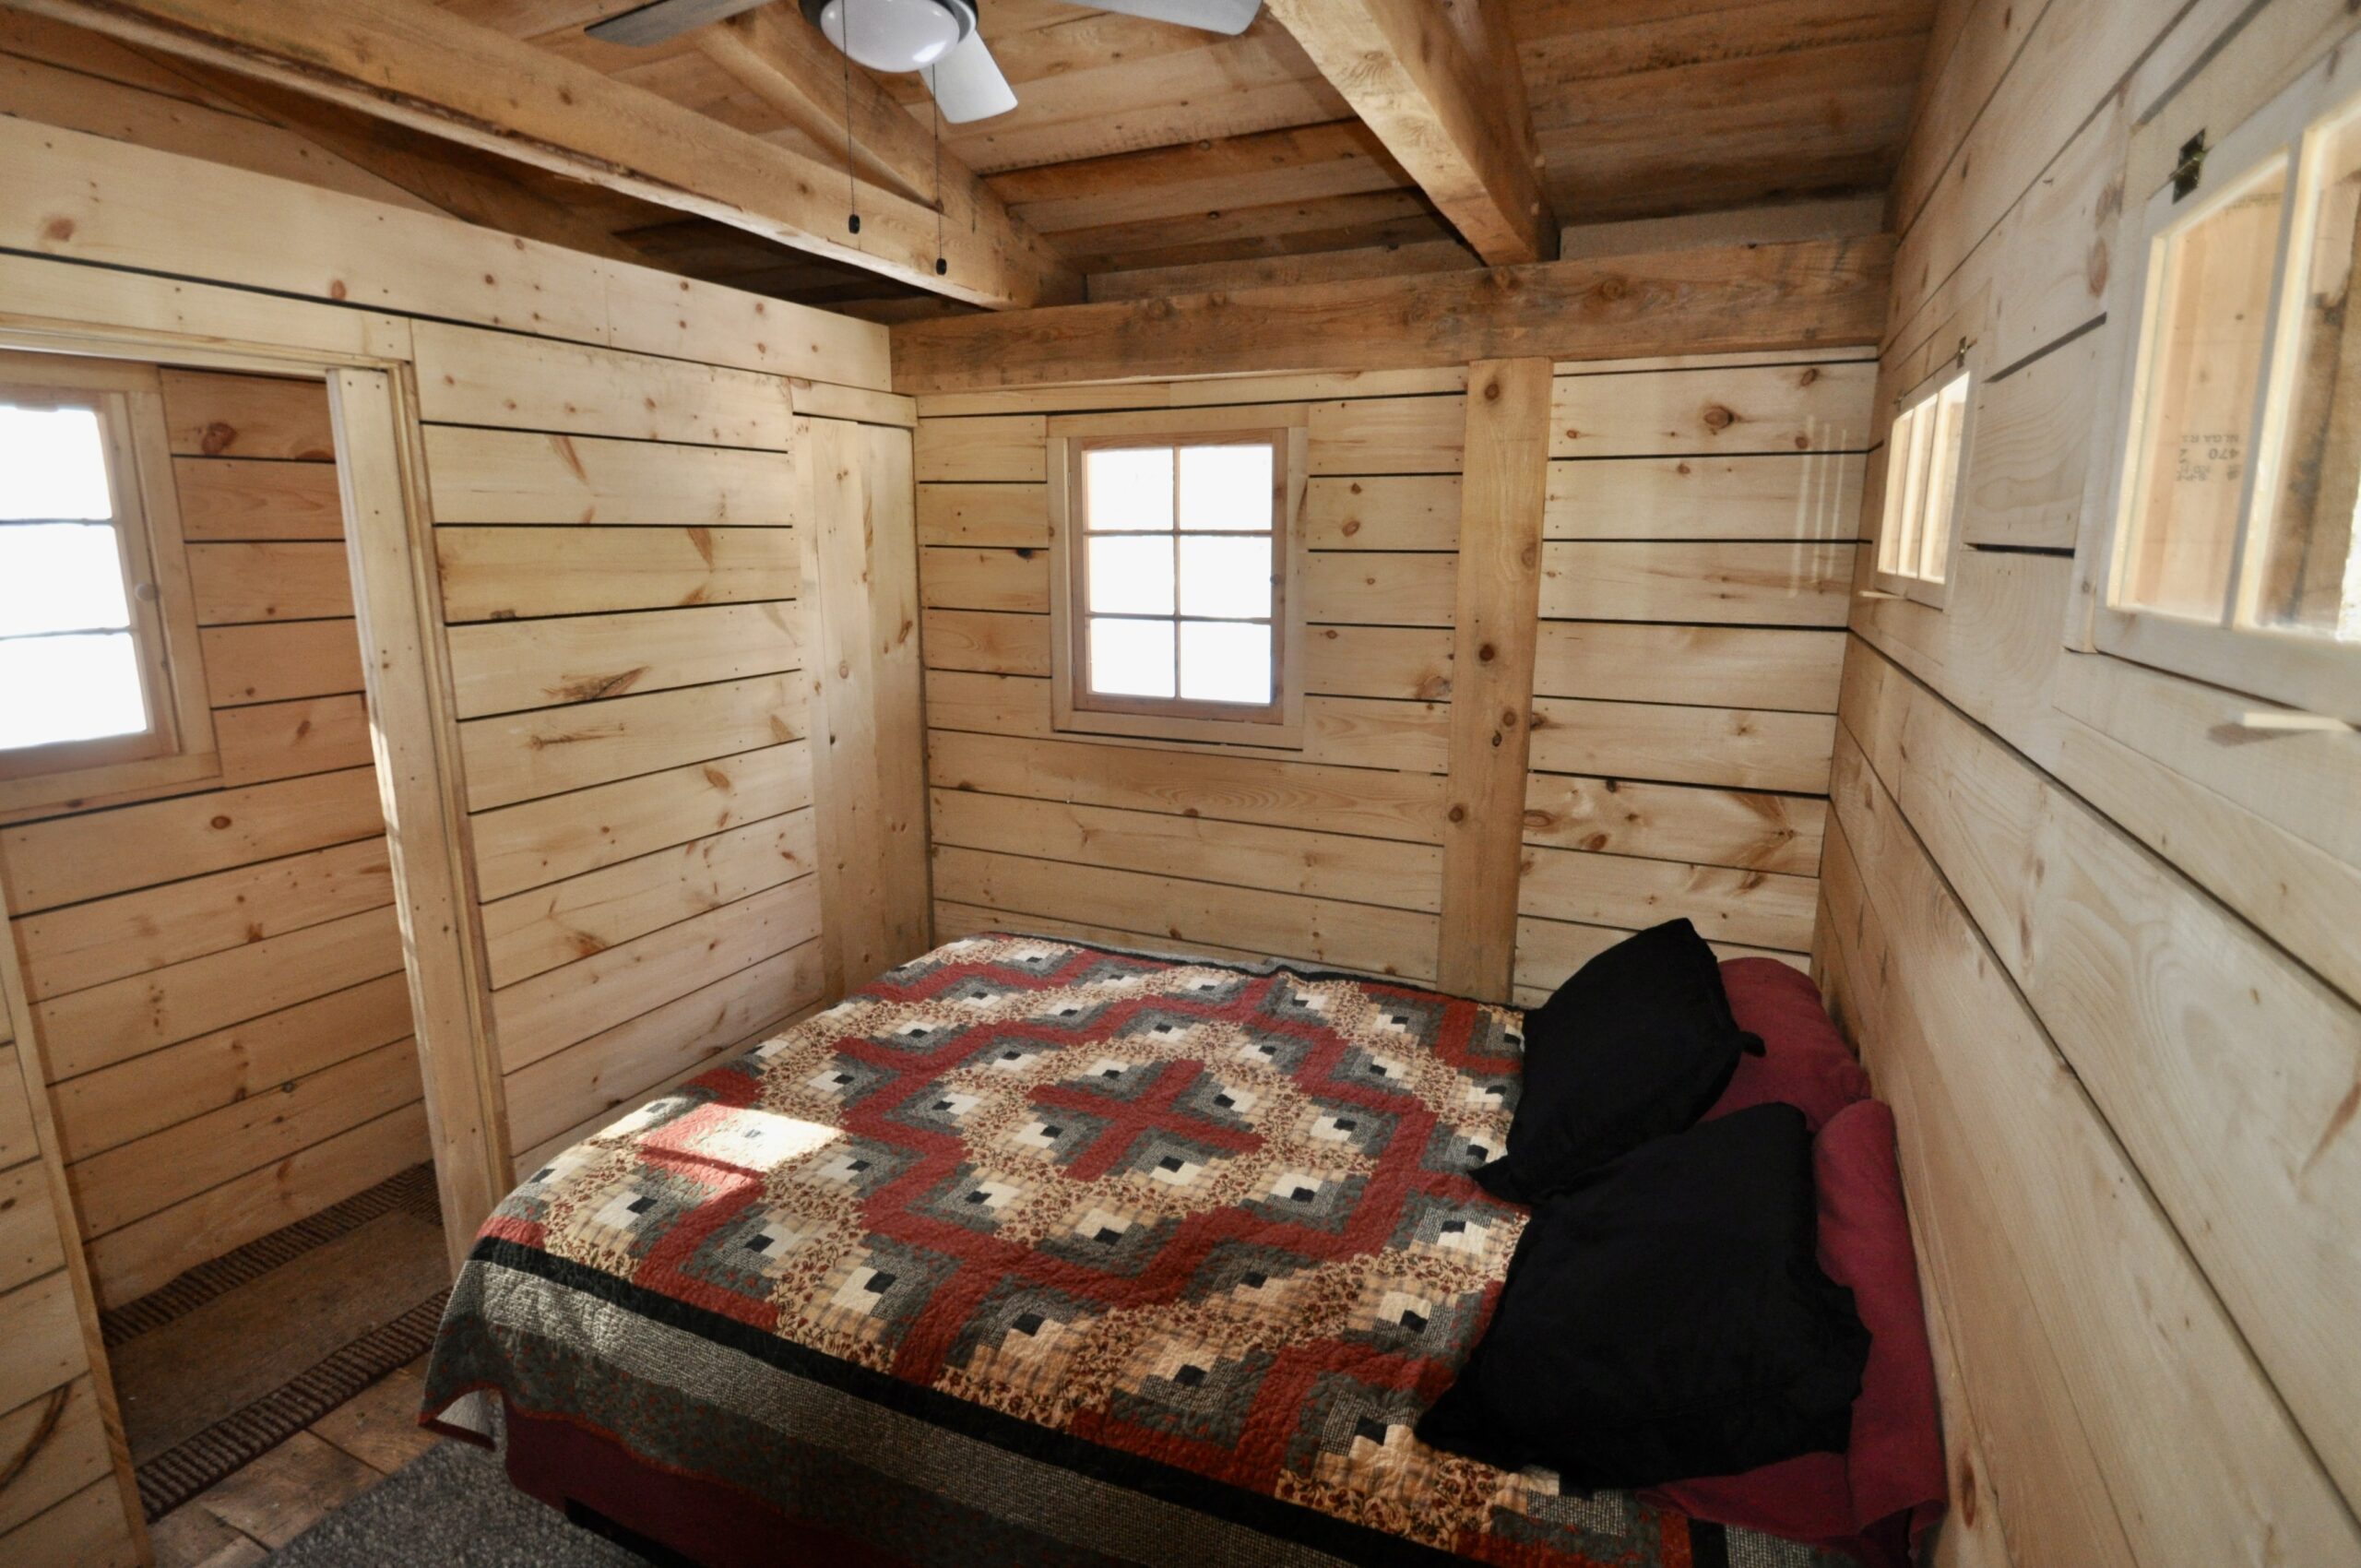 A small, simple bedroom in a wood cabin, with a big bed. Windows let in natural light.